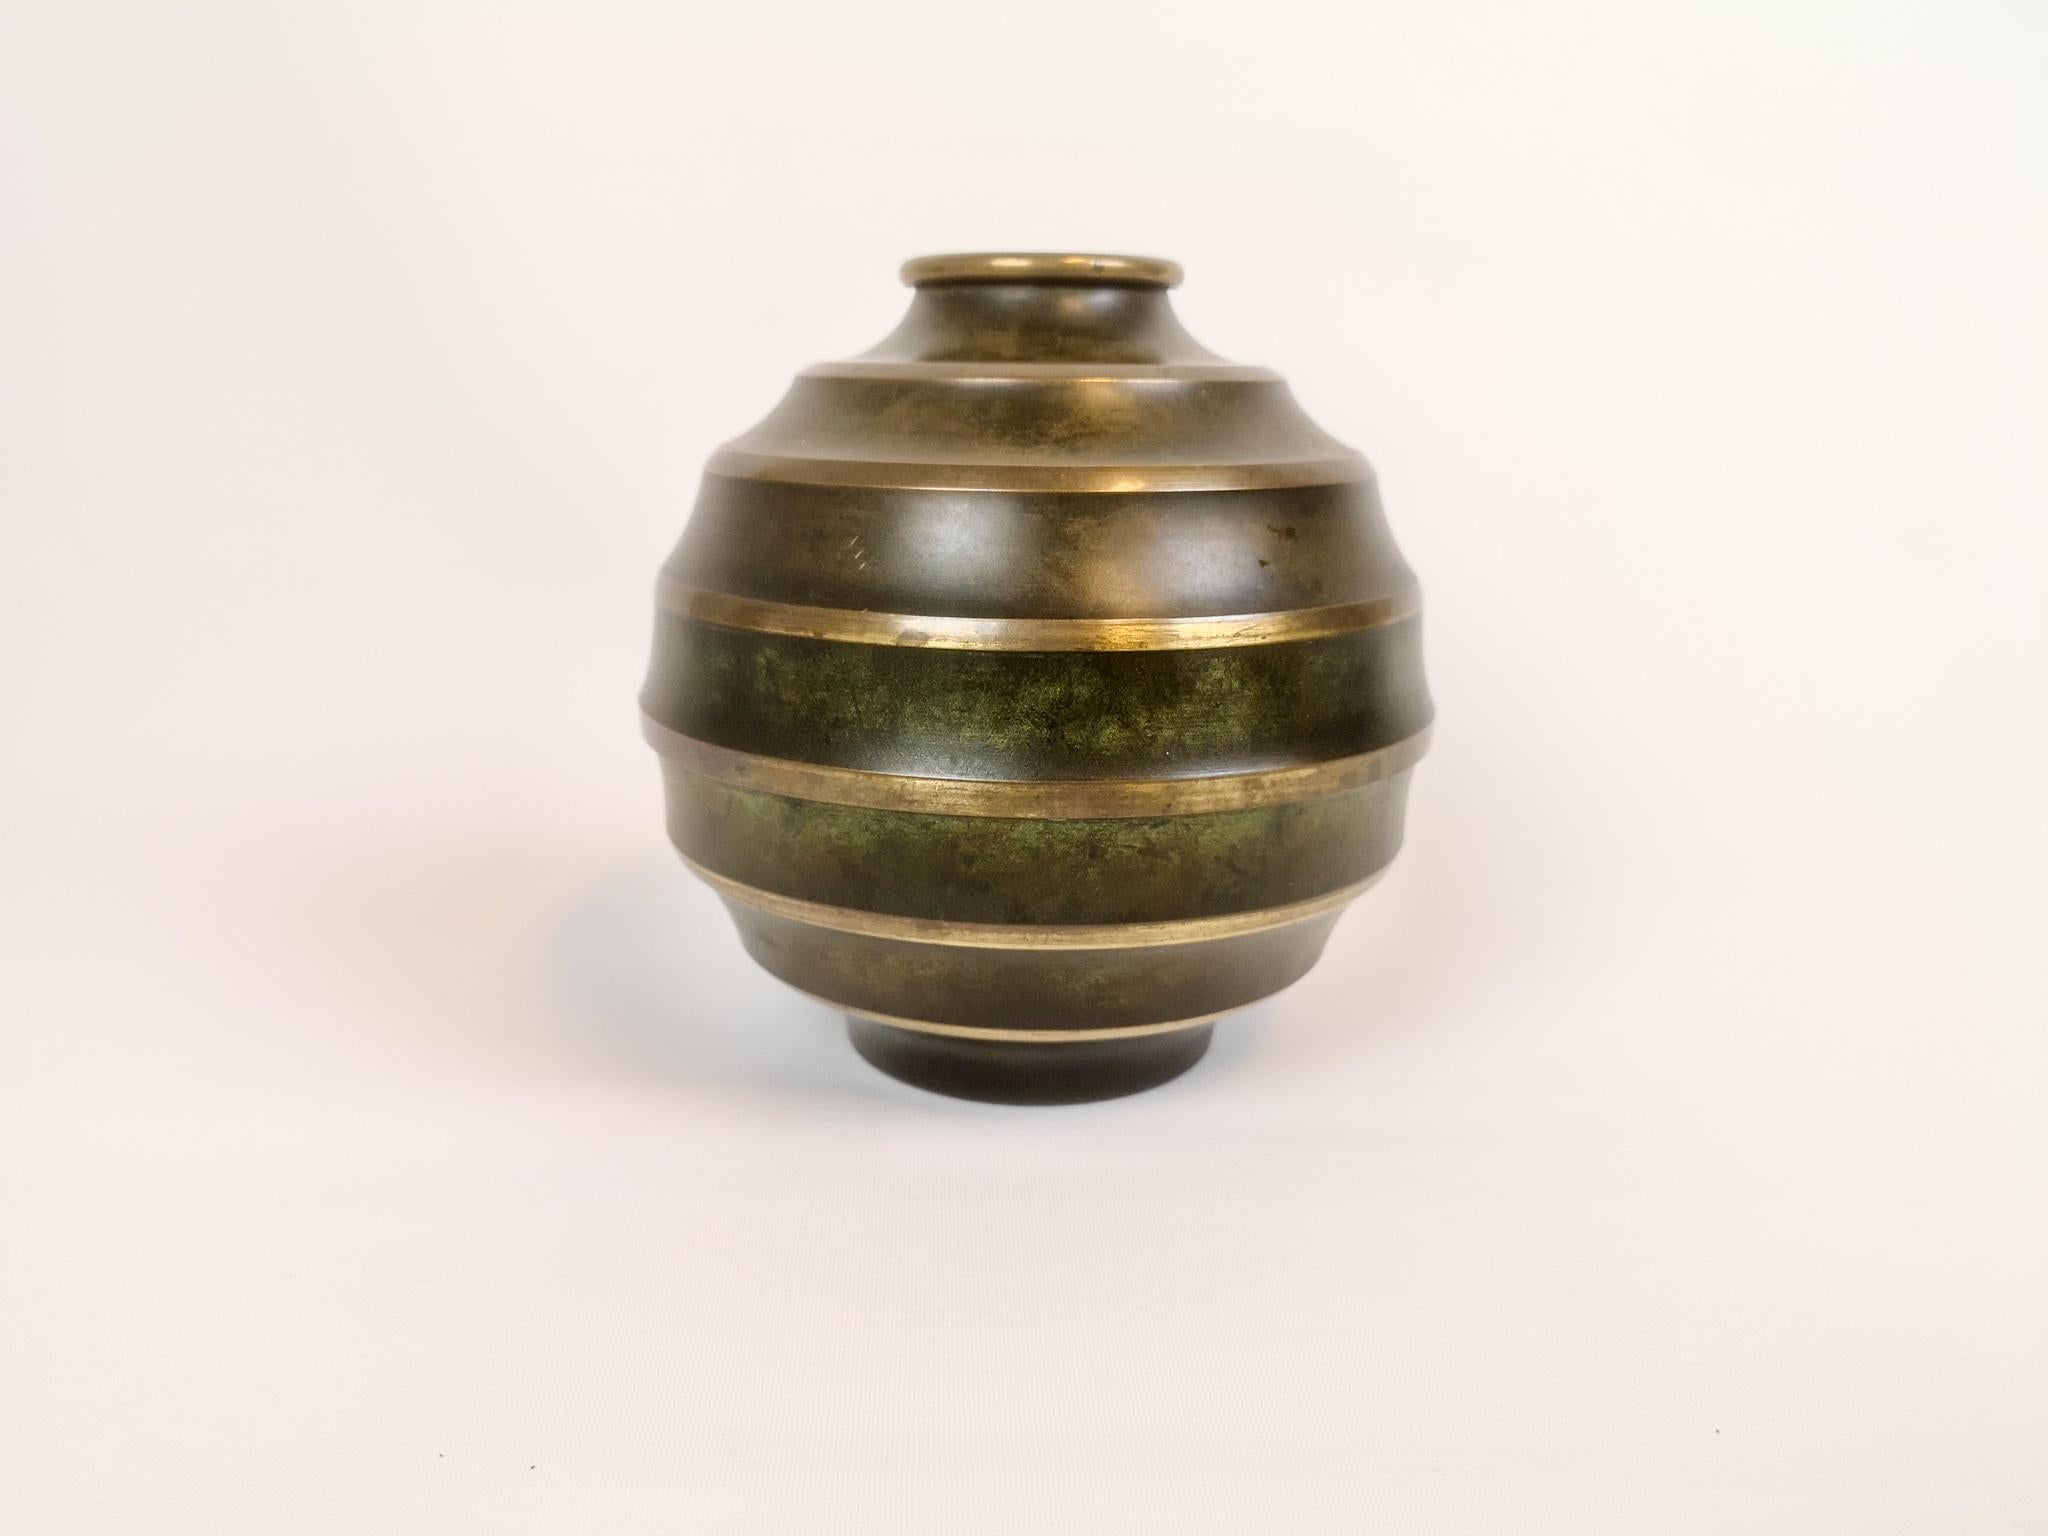 Wonderful Art Deco vase made in Sweden. The vase itself is made by SVM. It’s in patinated bronze and brass. 

It’s in good condition with wear and patina

Measures: H 18, D 19 cm.